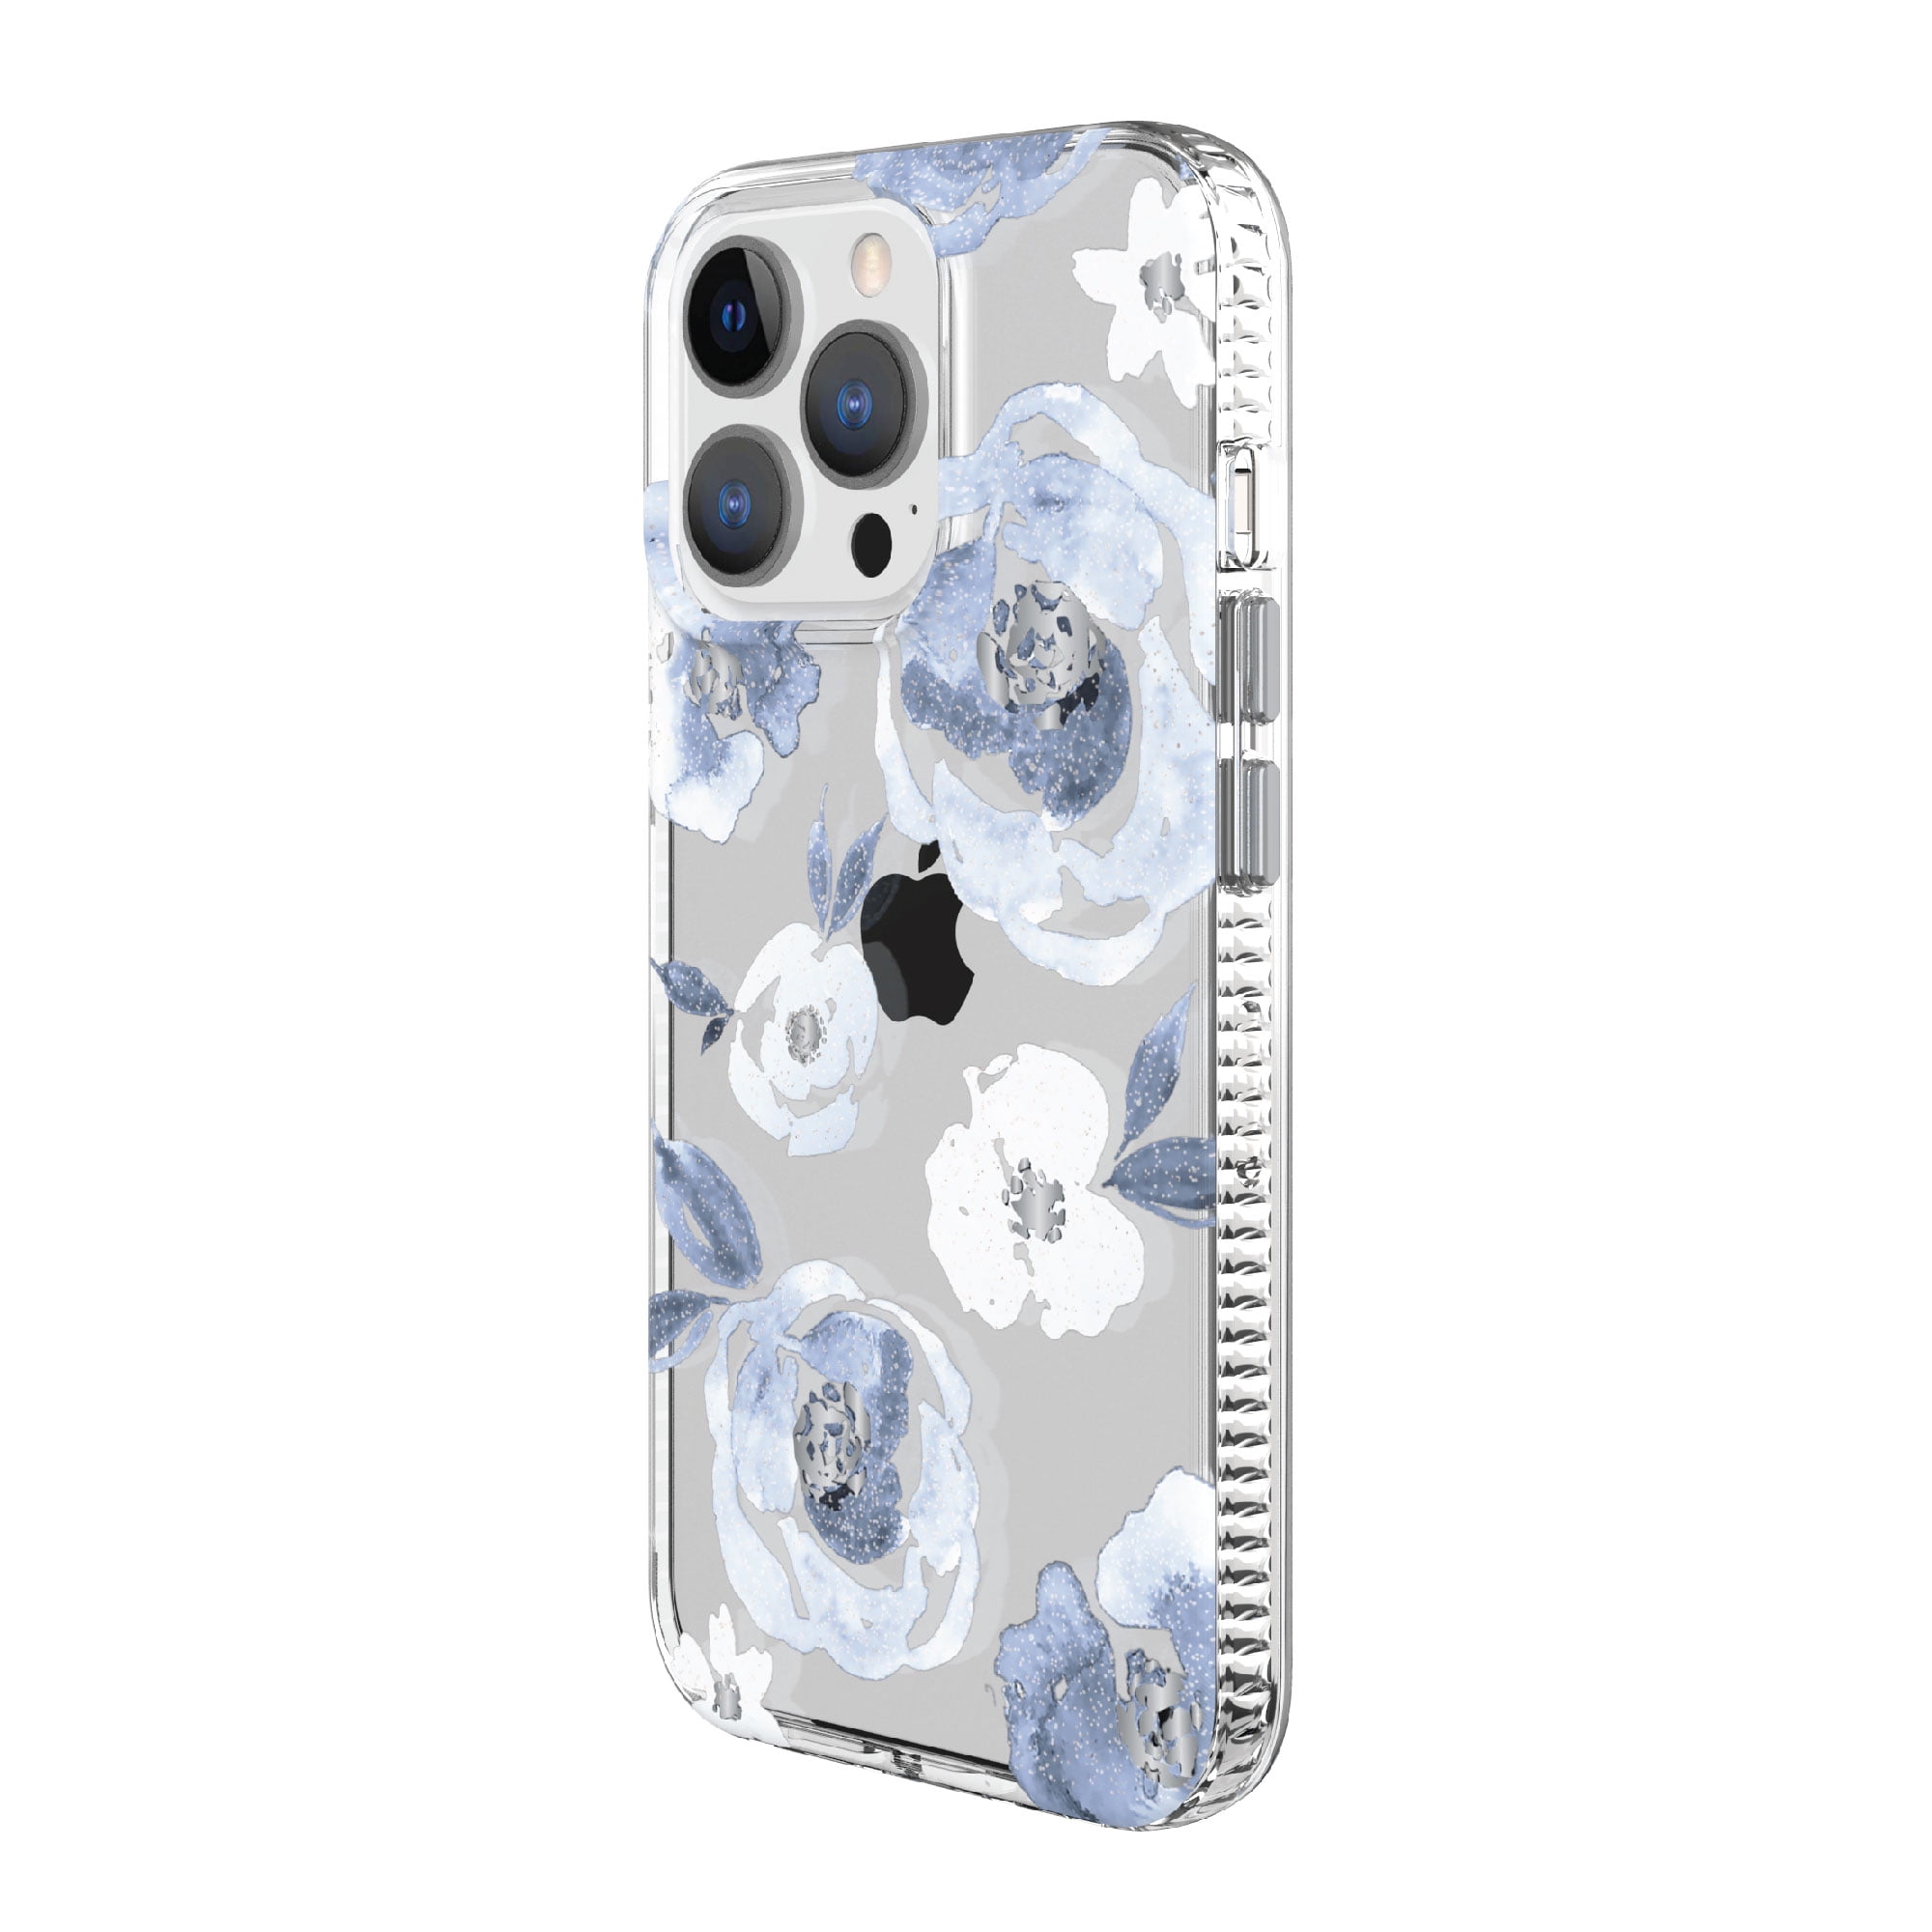 onn. Blue Floral with Glitter Phone Case for iPhone 13 Pro Max / iPhone 12 Pro Max